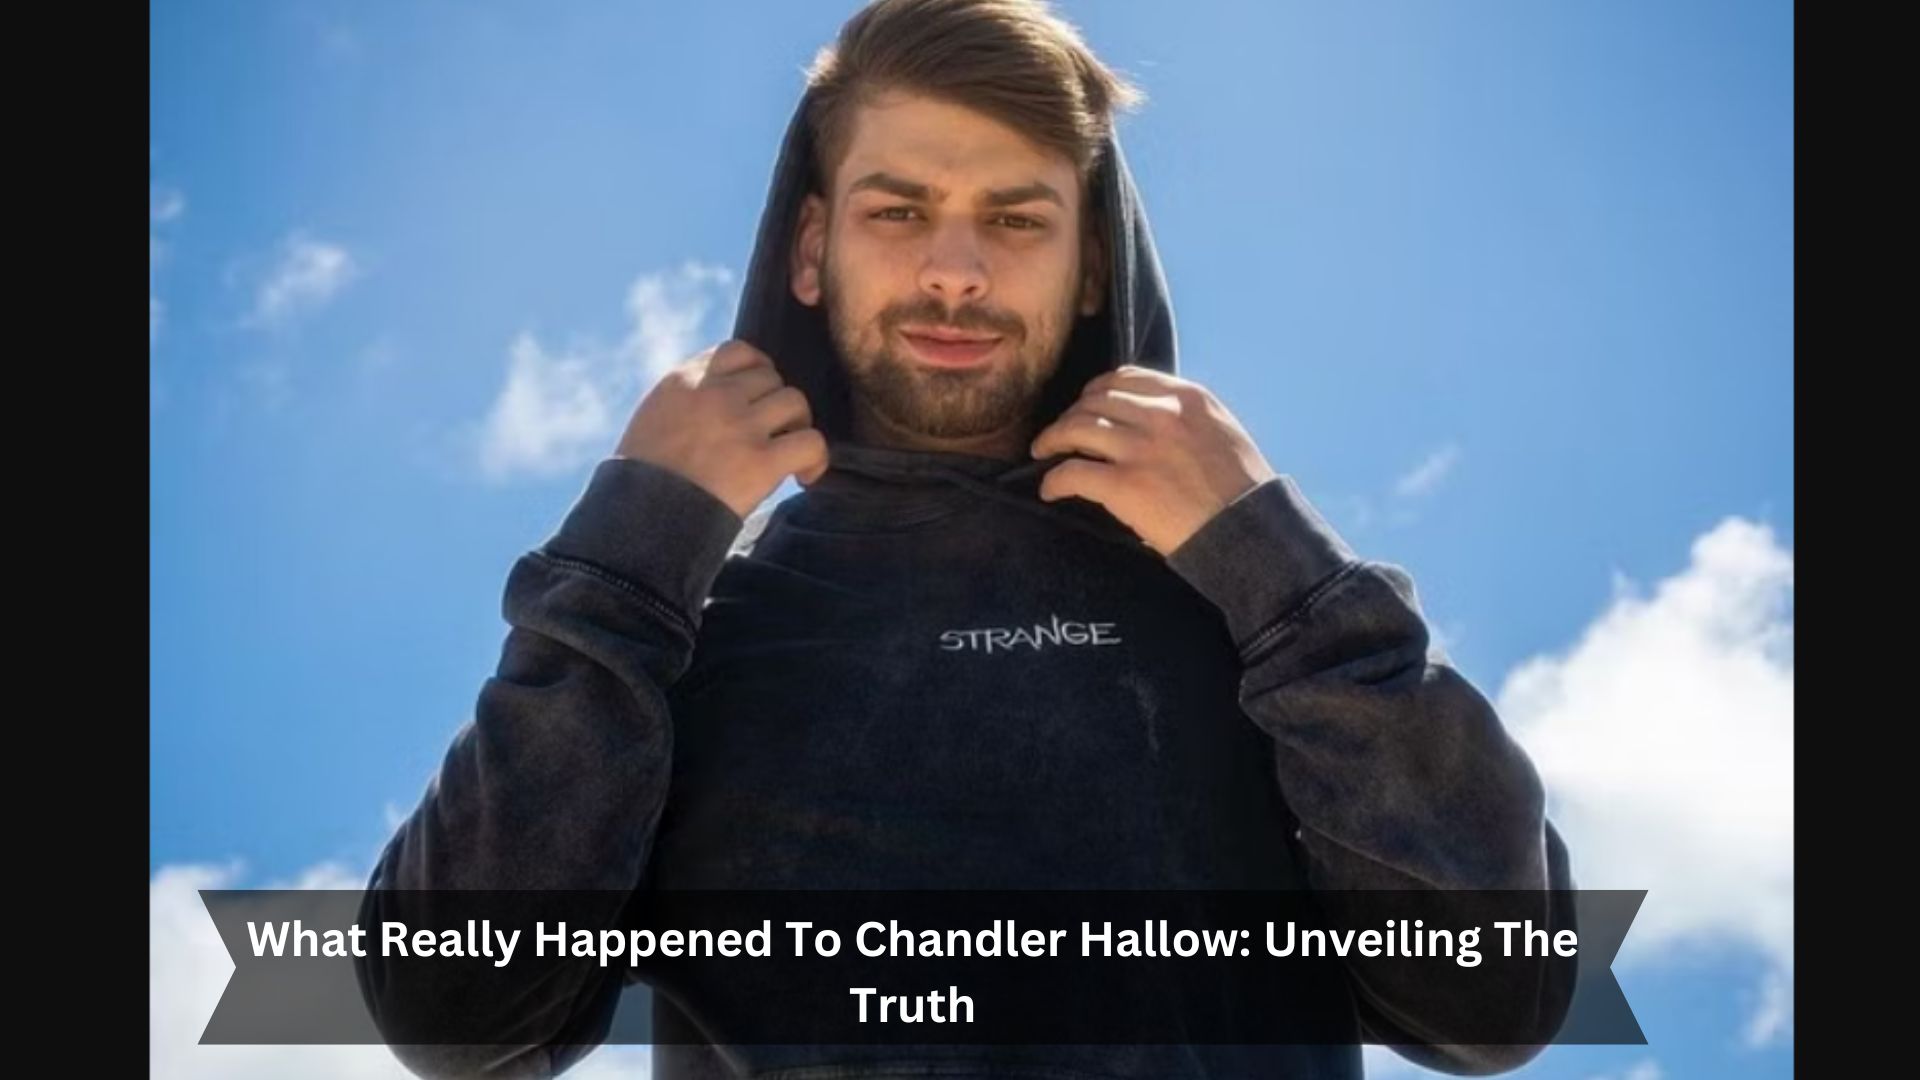 What-Really-Happened-To-Chandler-Hallow-Unveiling-The-Truth